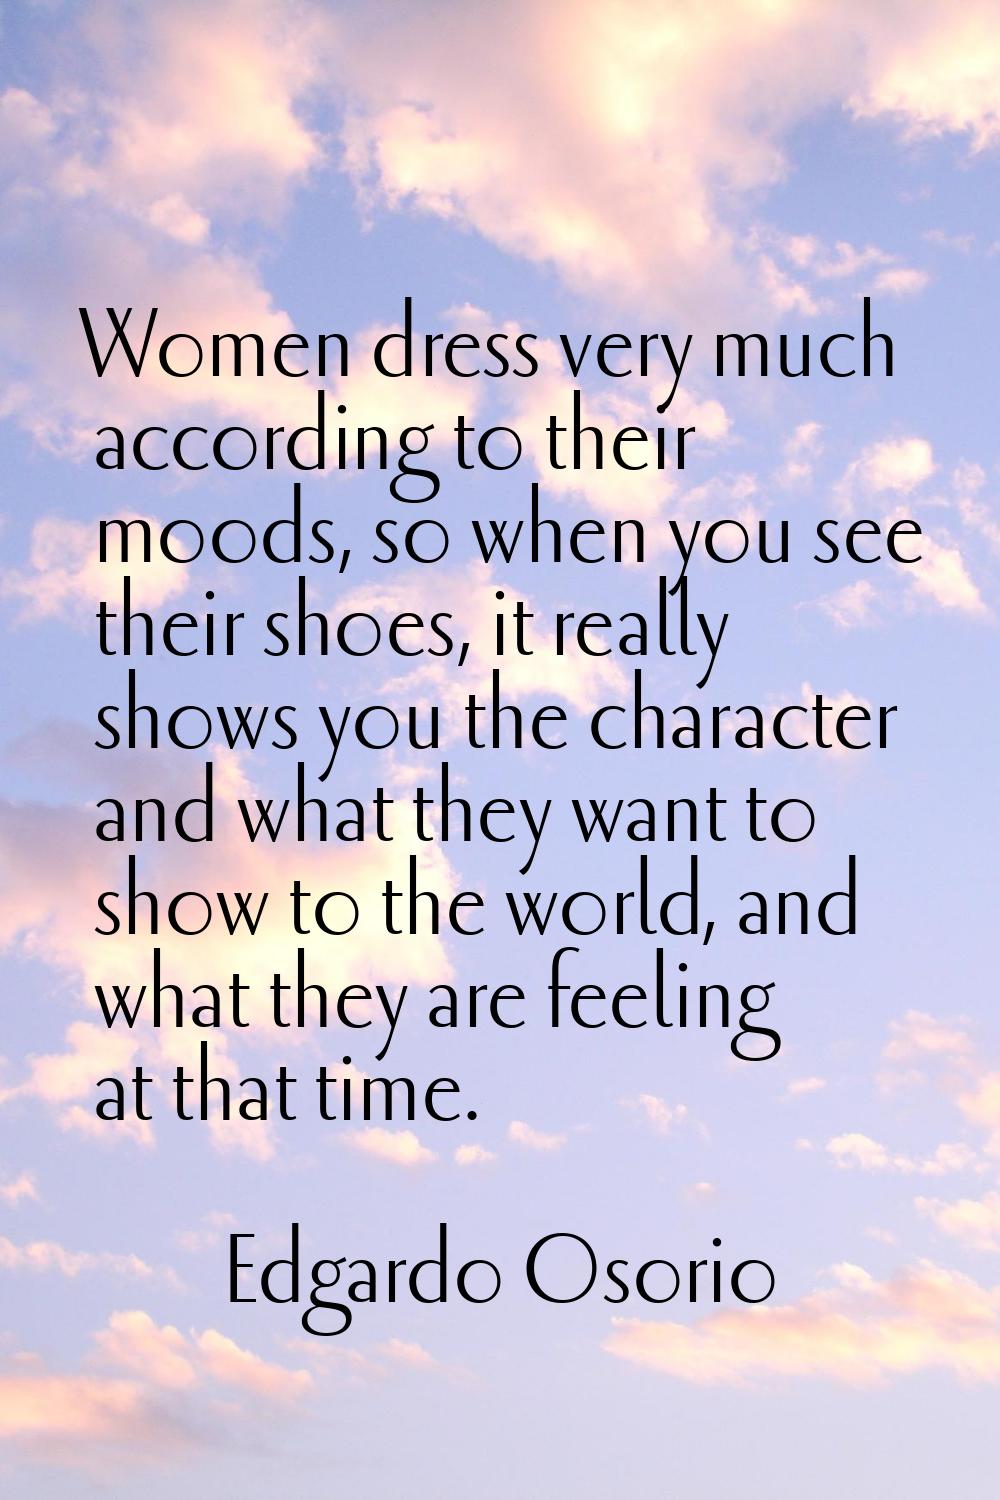 Women dress very much according to their moods, so when you see their shoes, it really shows you th